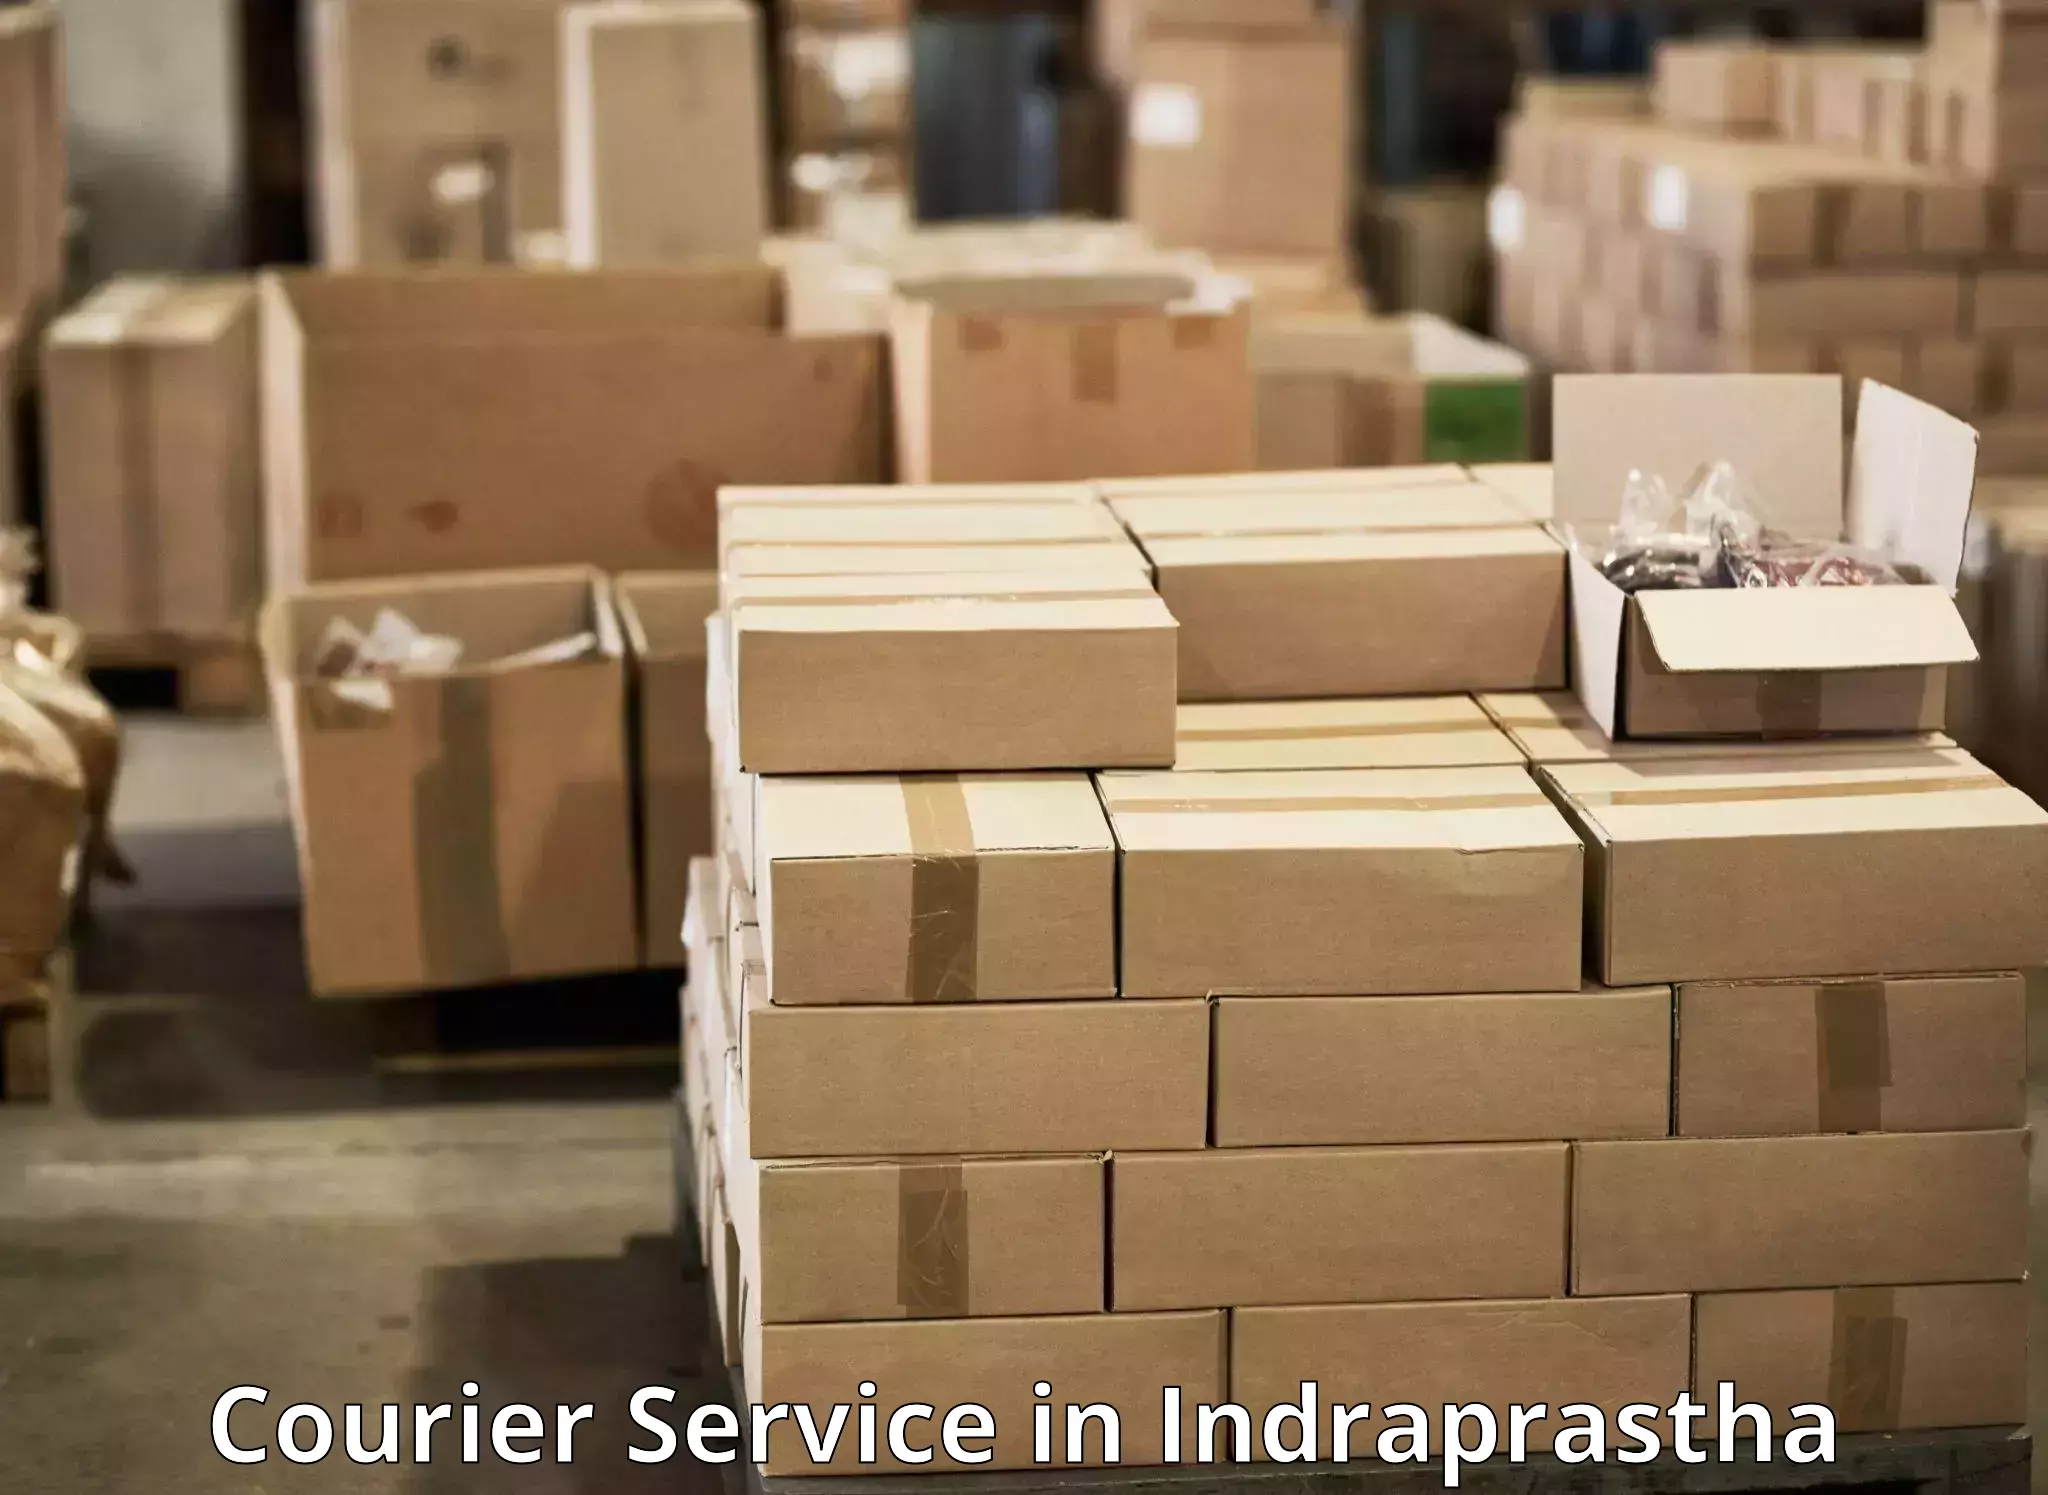 Overnight delivery in Indraprastha